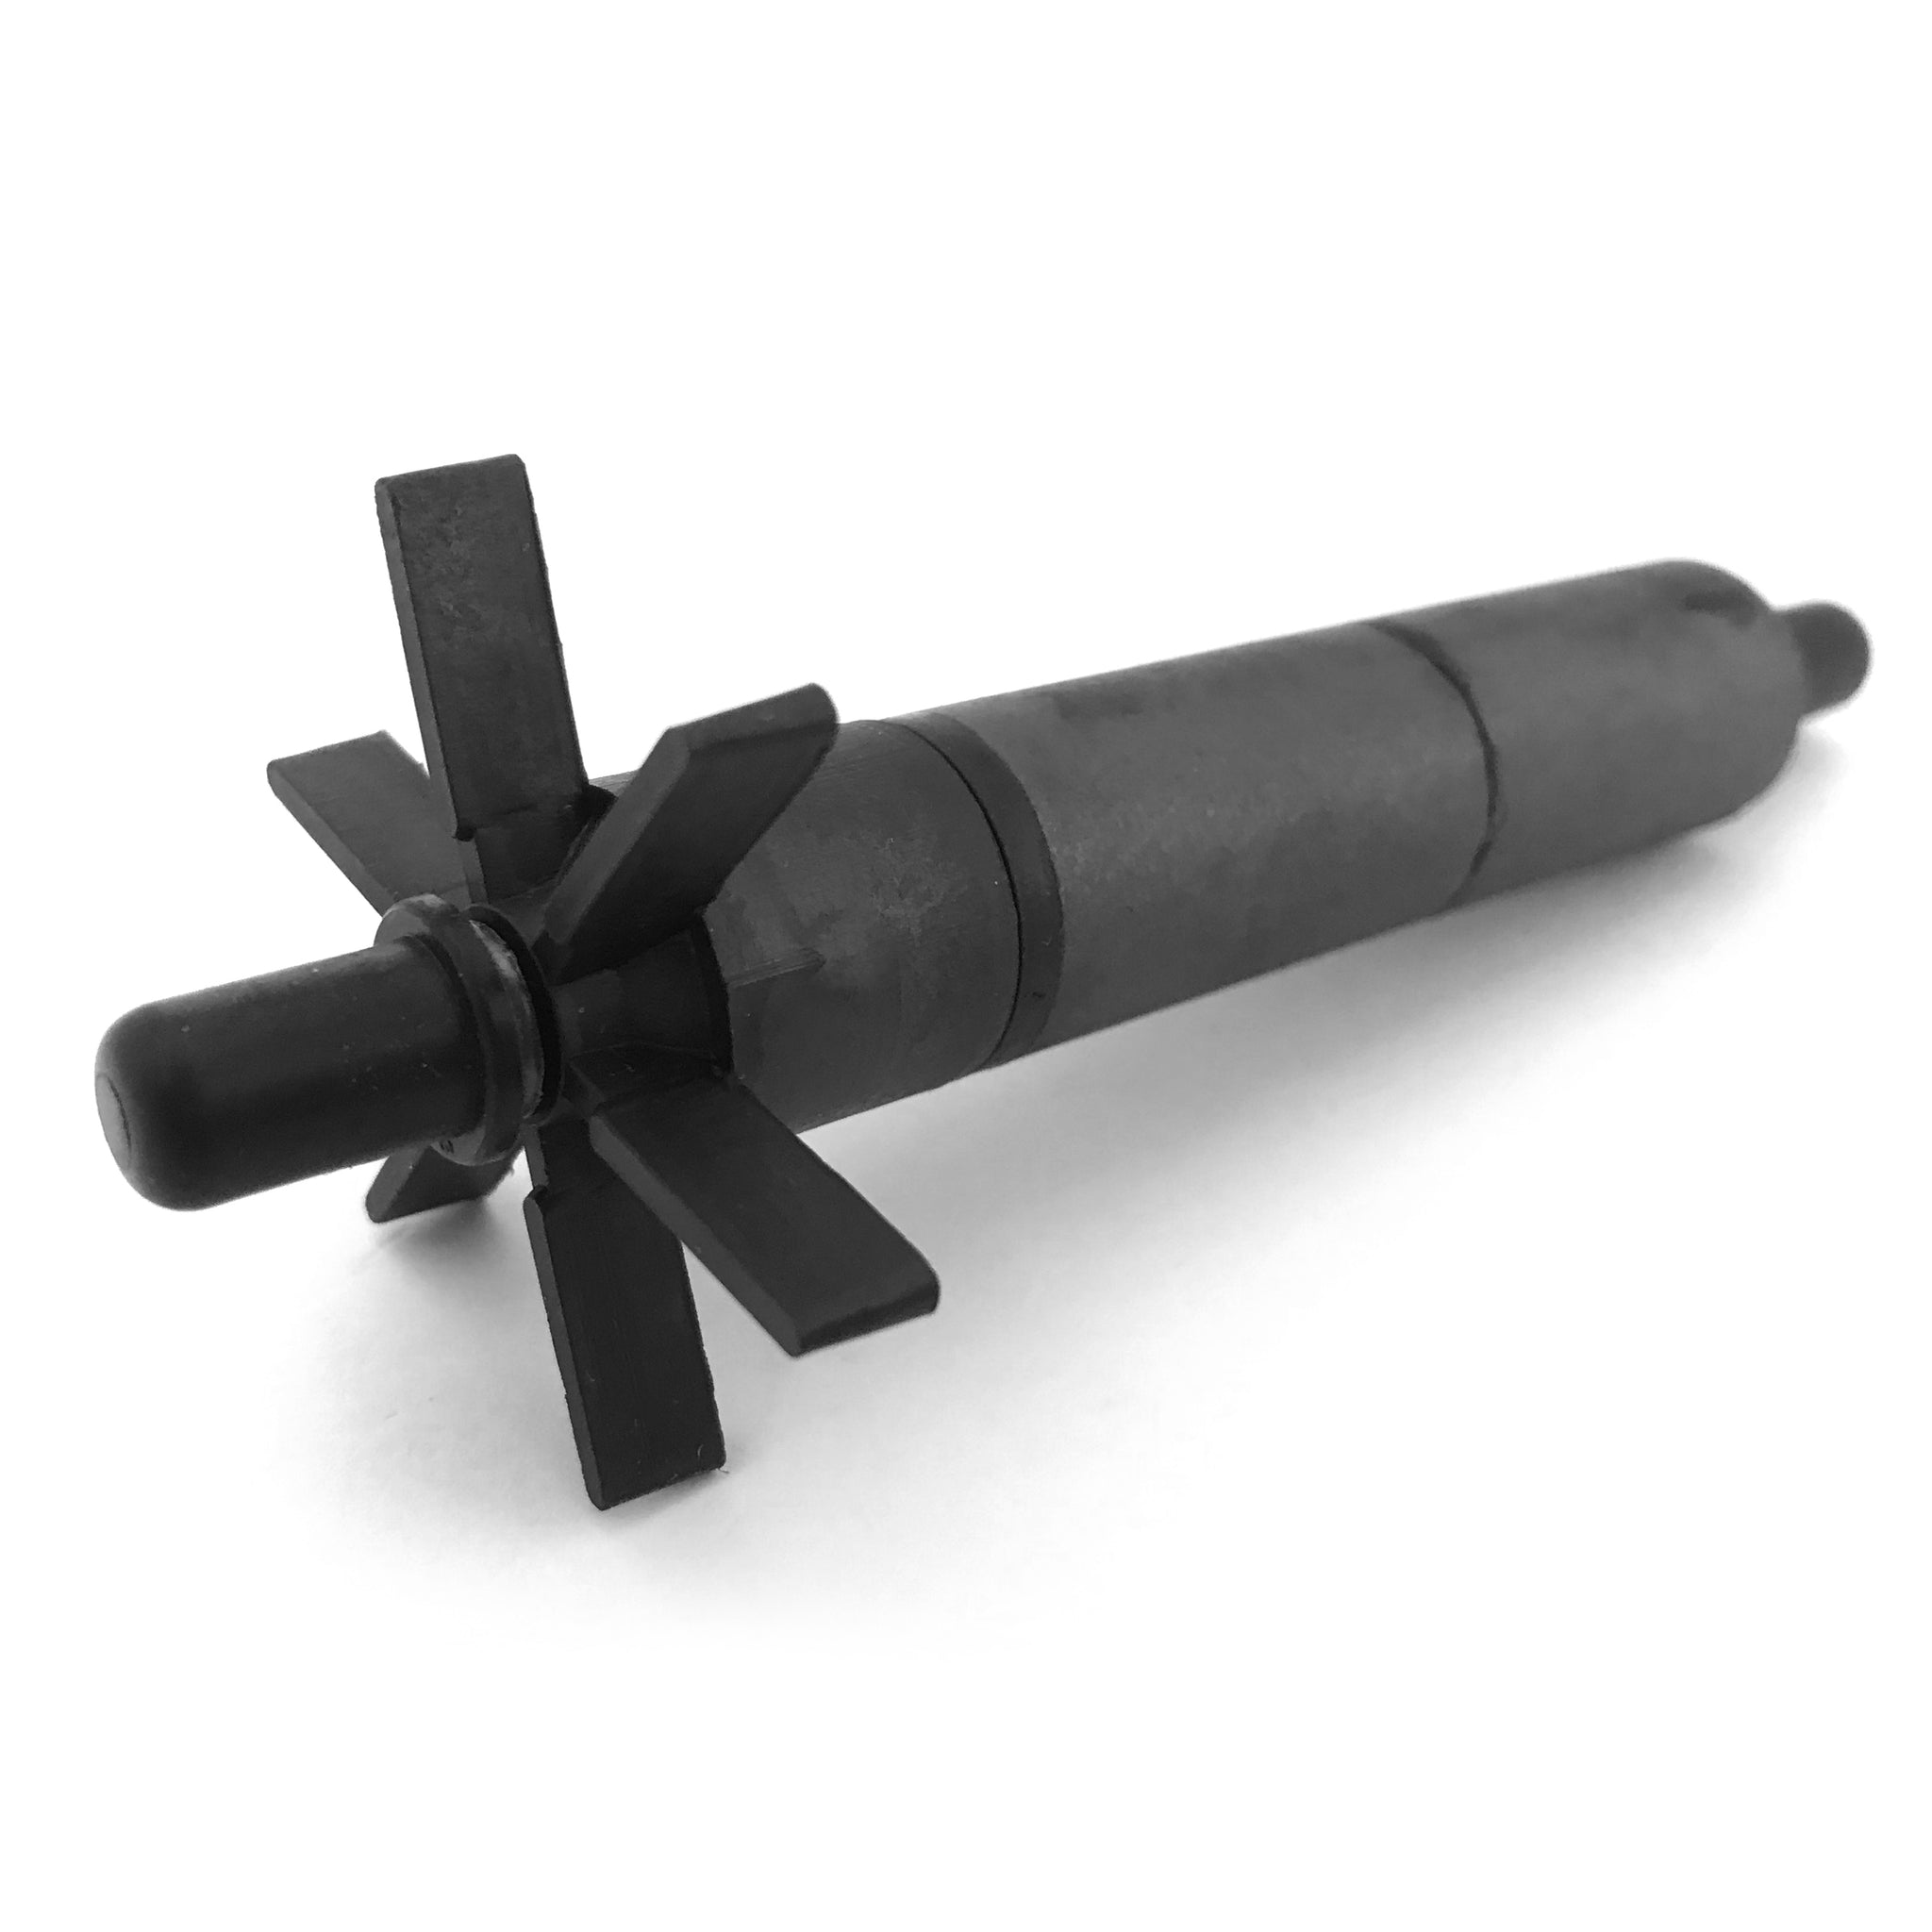 Replacement Impeller for Model 12 02712, 02722 or 40132